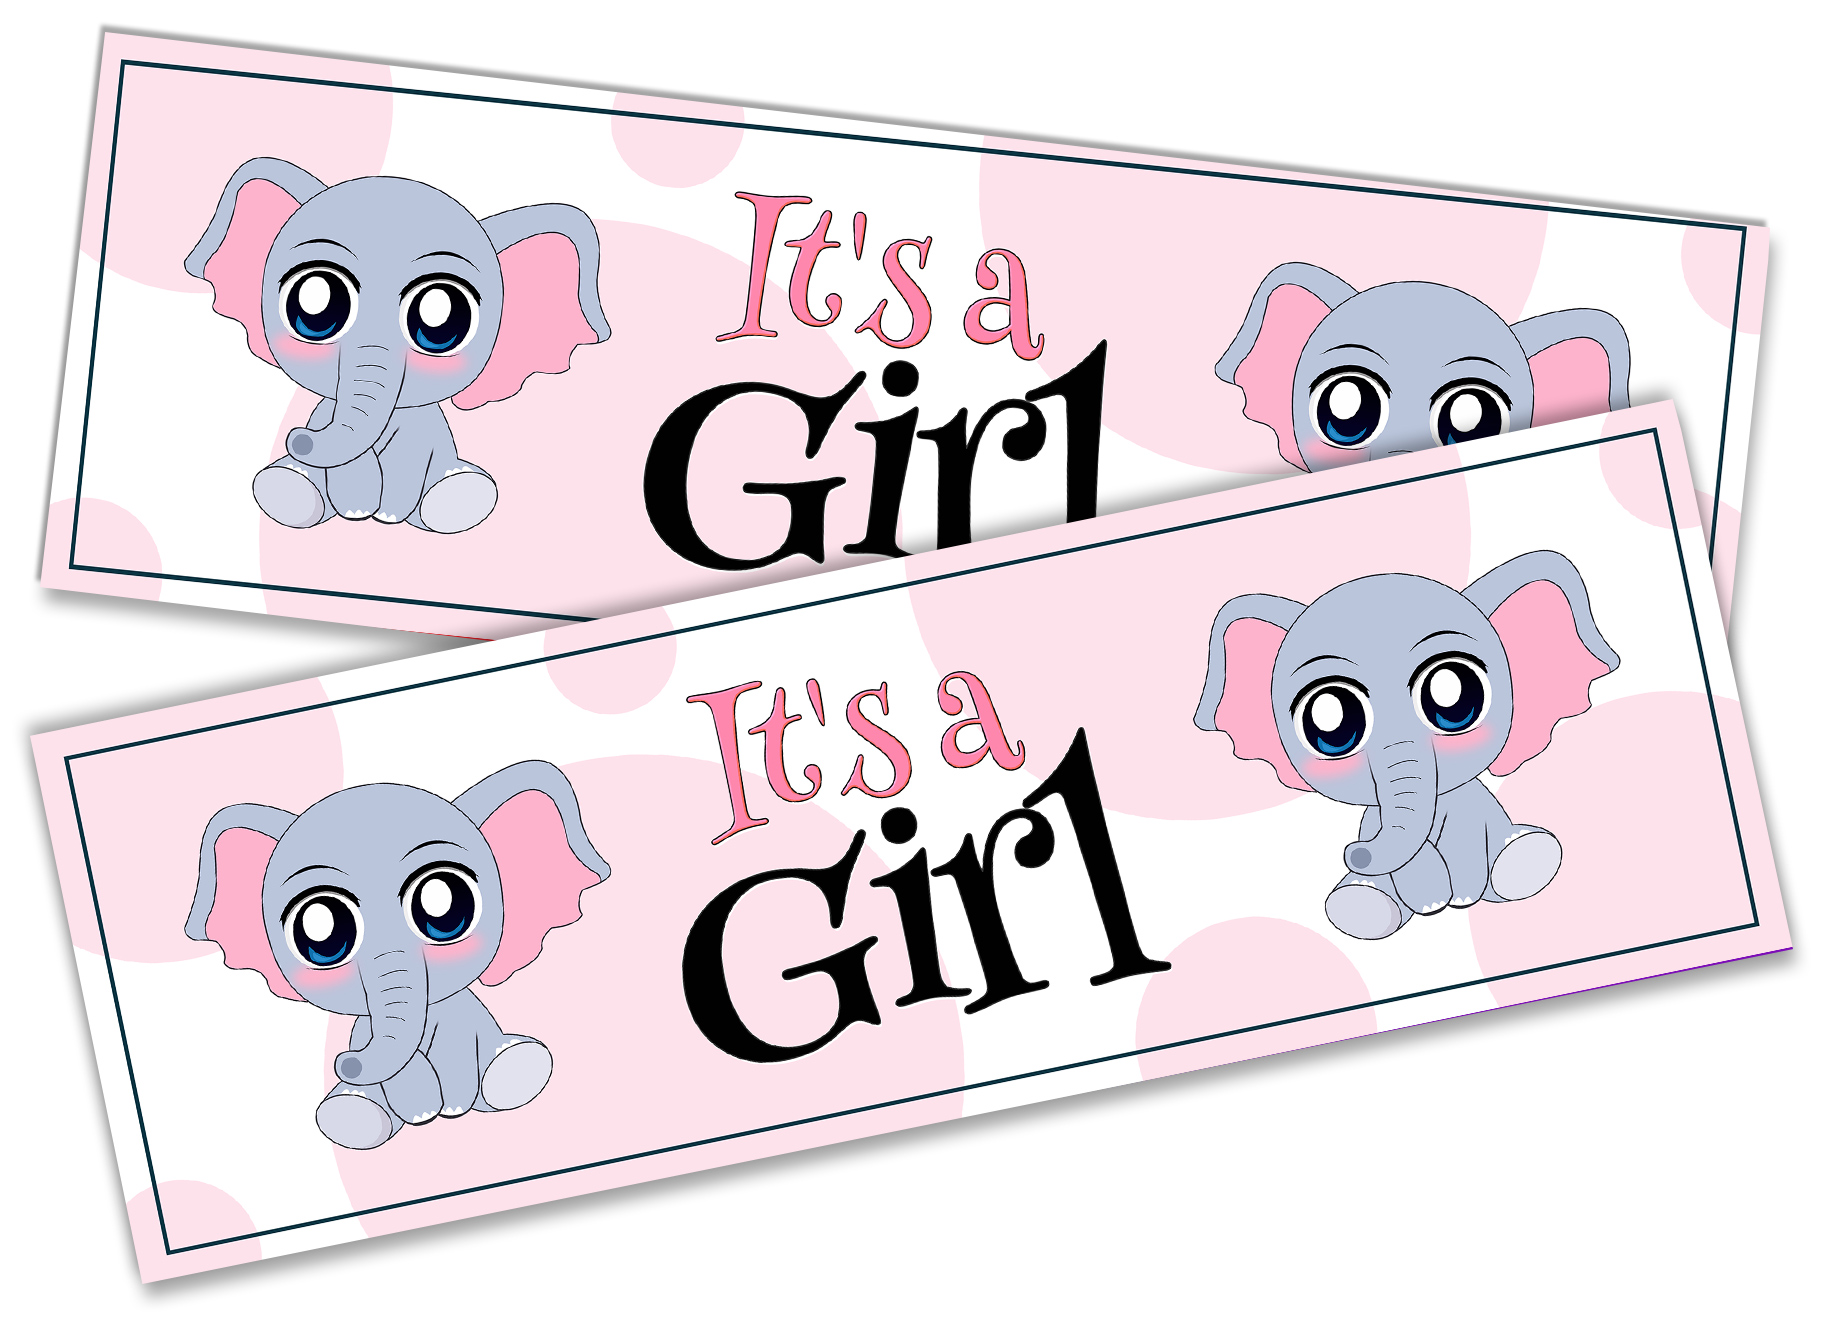 Details about   x2 It's A Girl Banner Celebration Homecoming Boy Girl Baby Welcome Newborn 49